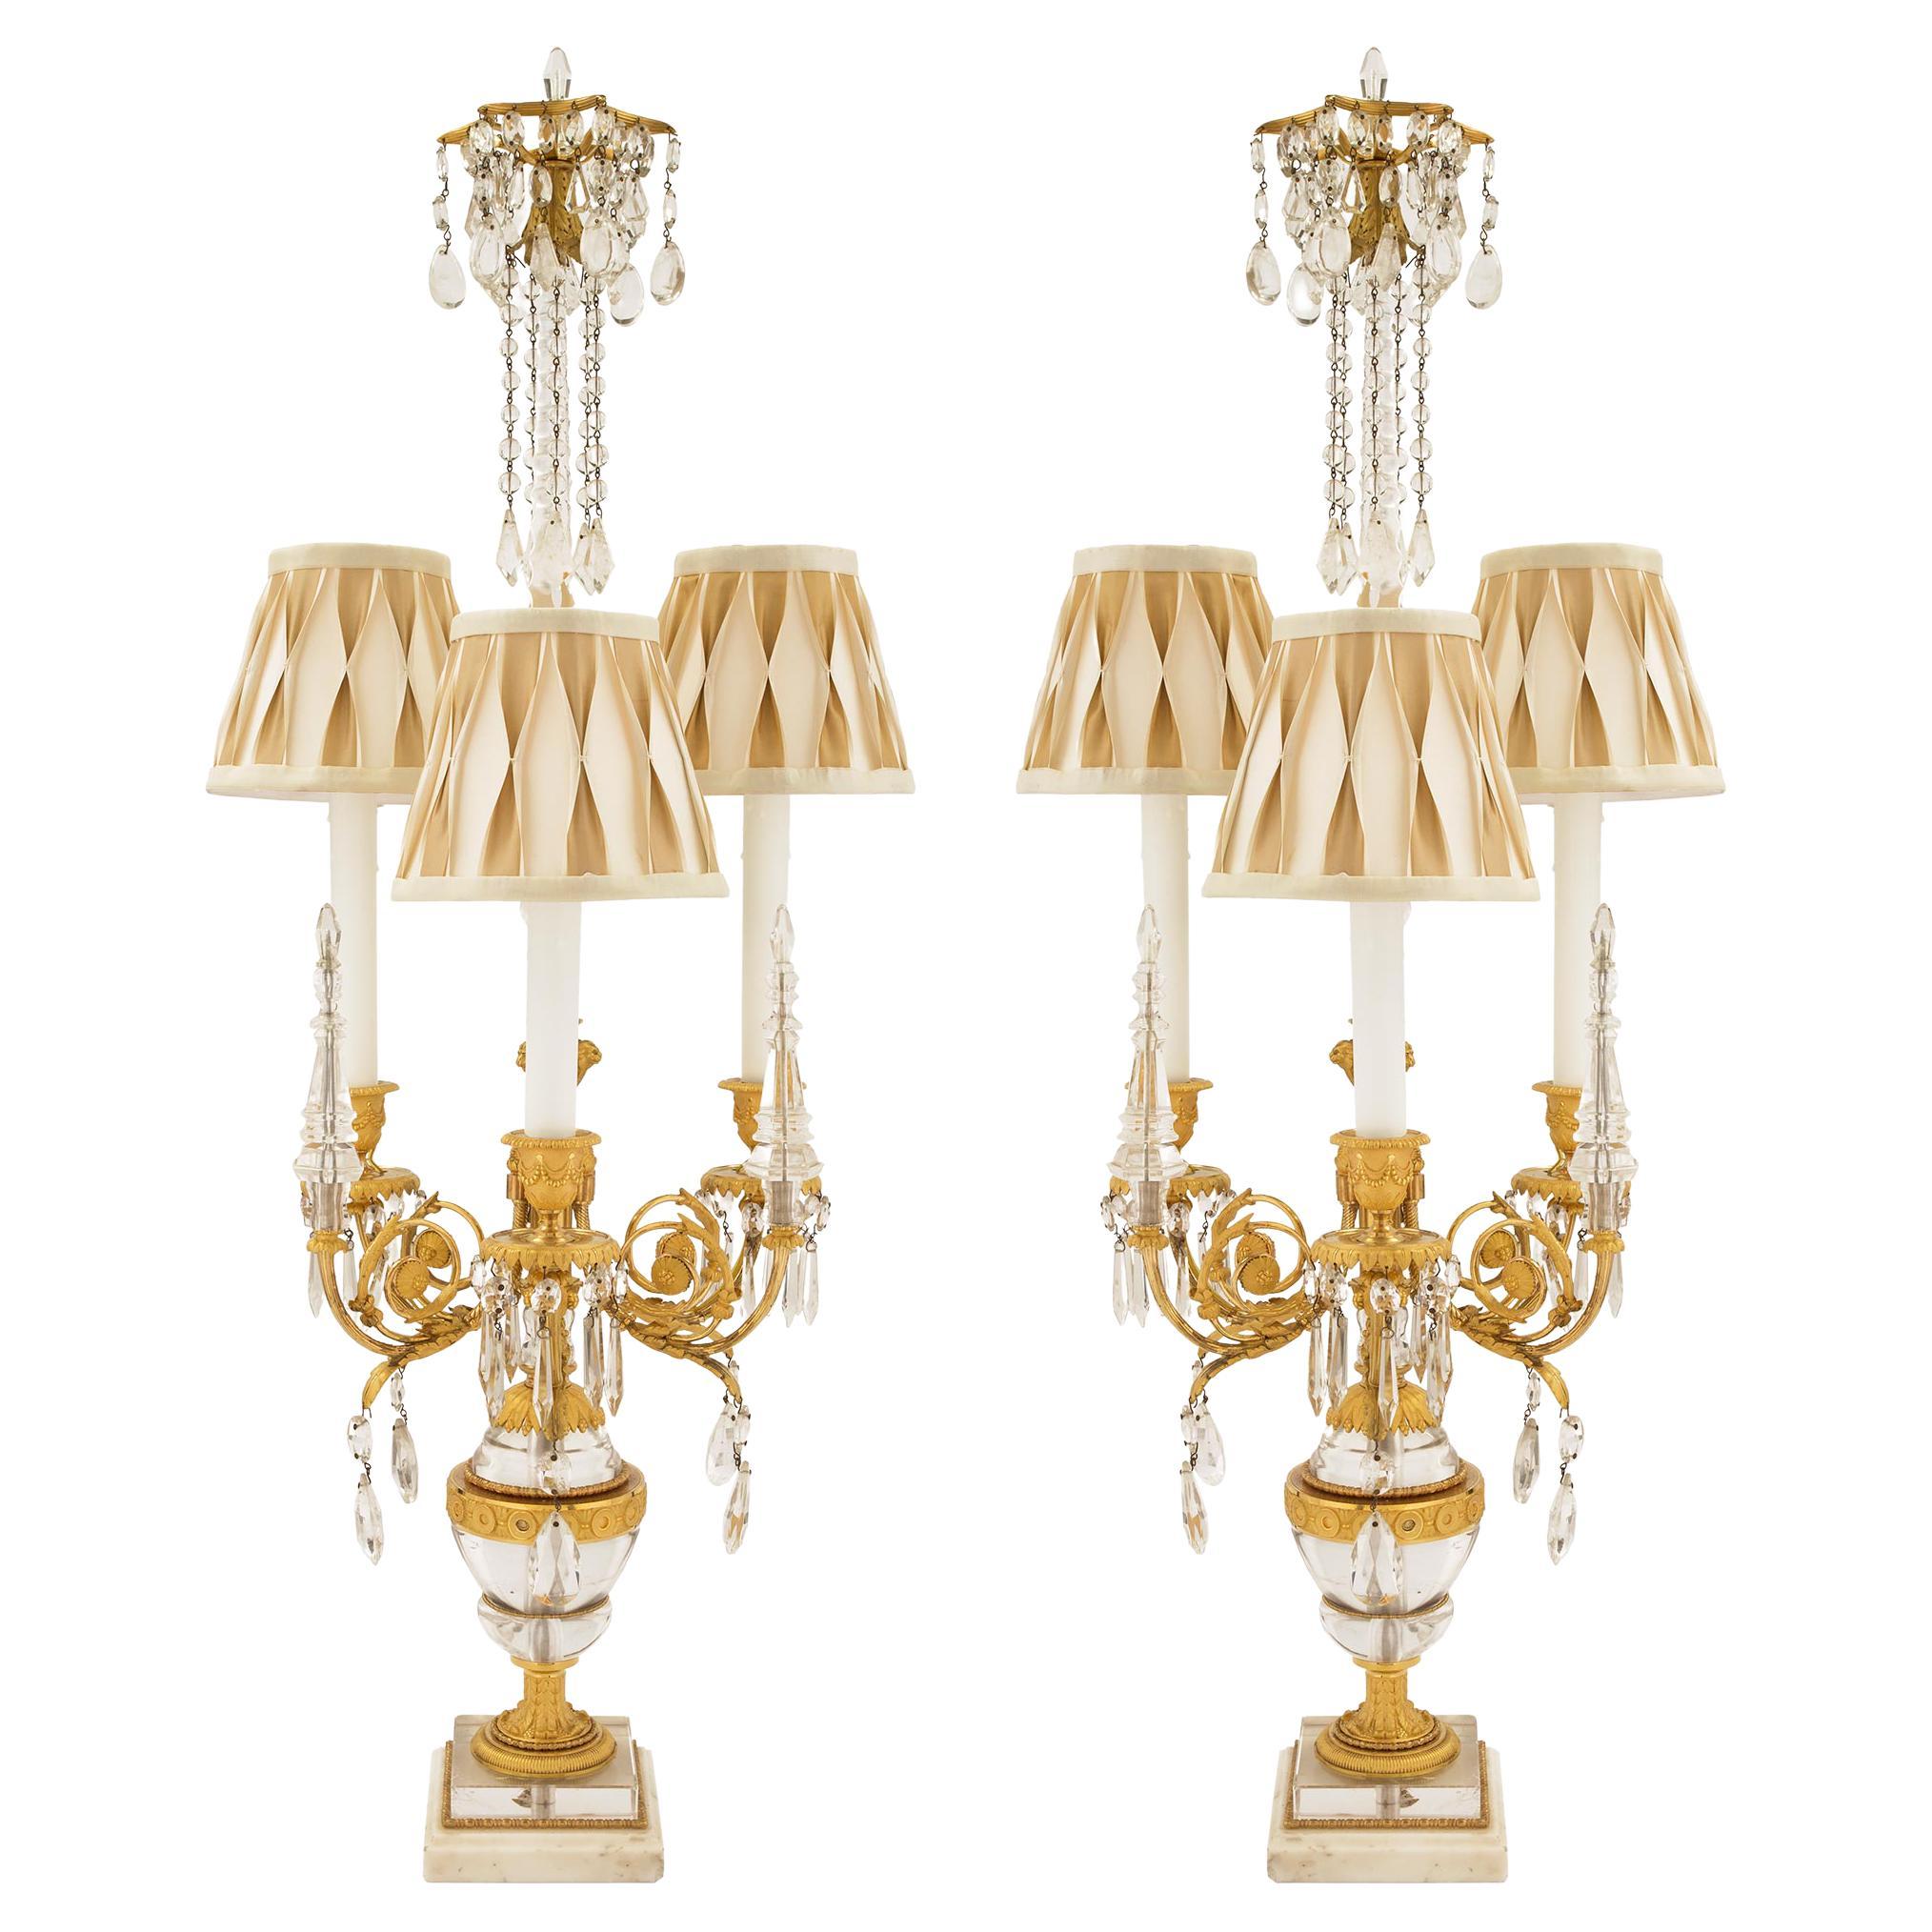 Pair of French 19th Century Louis XVI Style Crystal and Ormolu Lamps